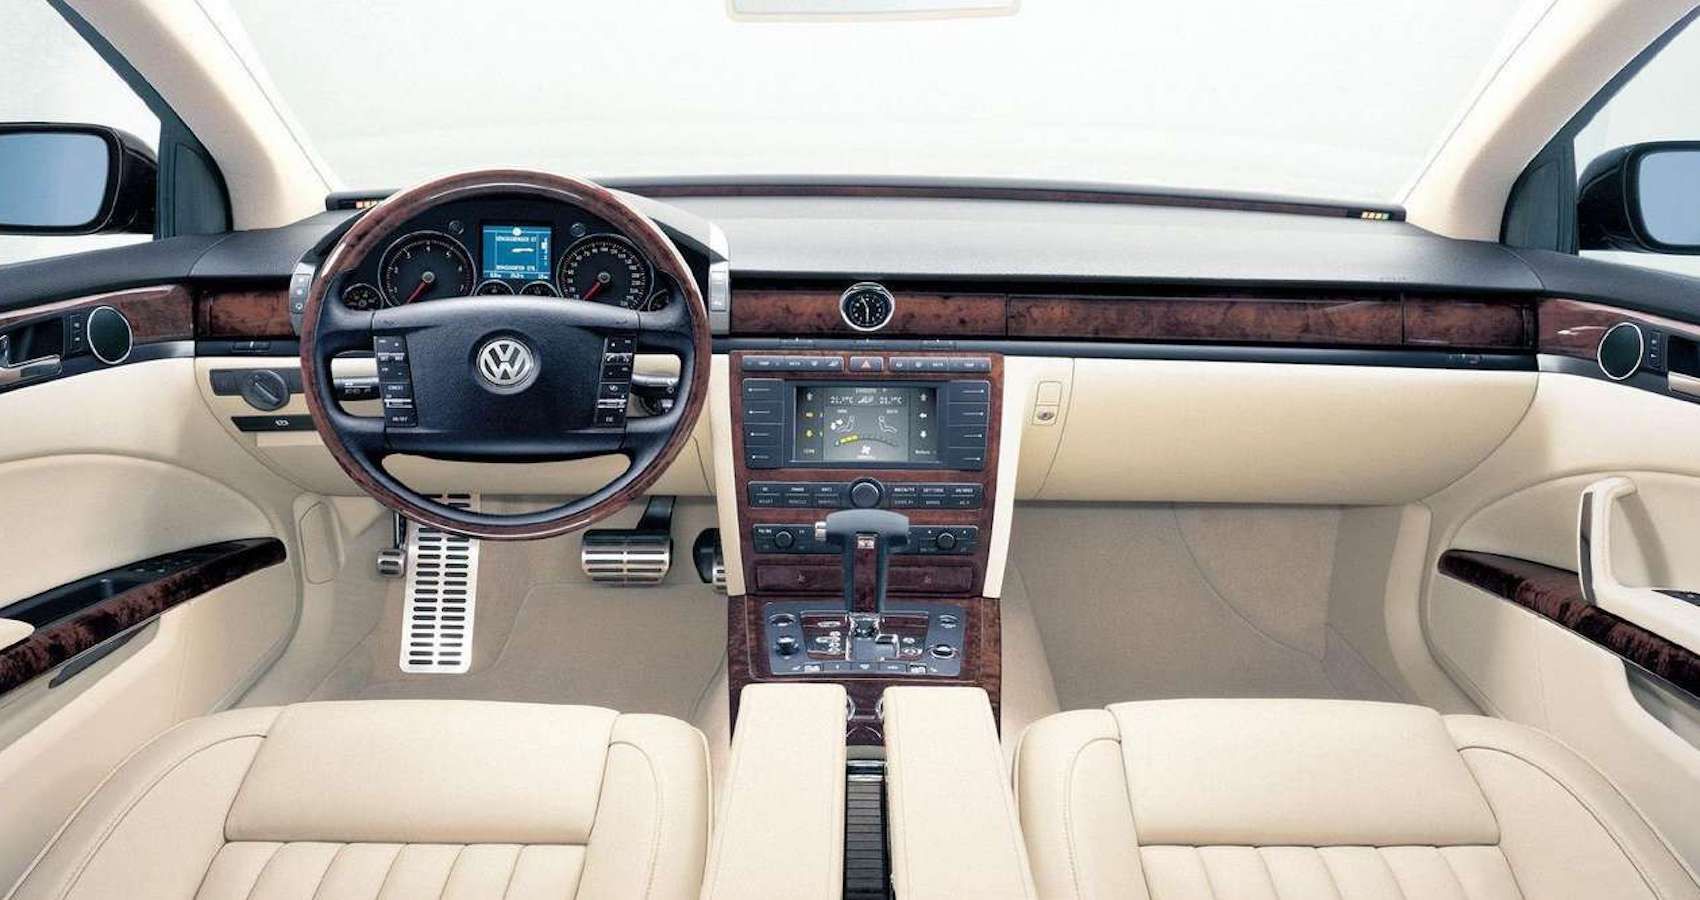 Volkswagen-Phaeton-2002 front seats with infotainment cream leather and wood trimmed steering wheel